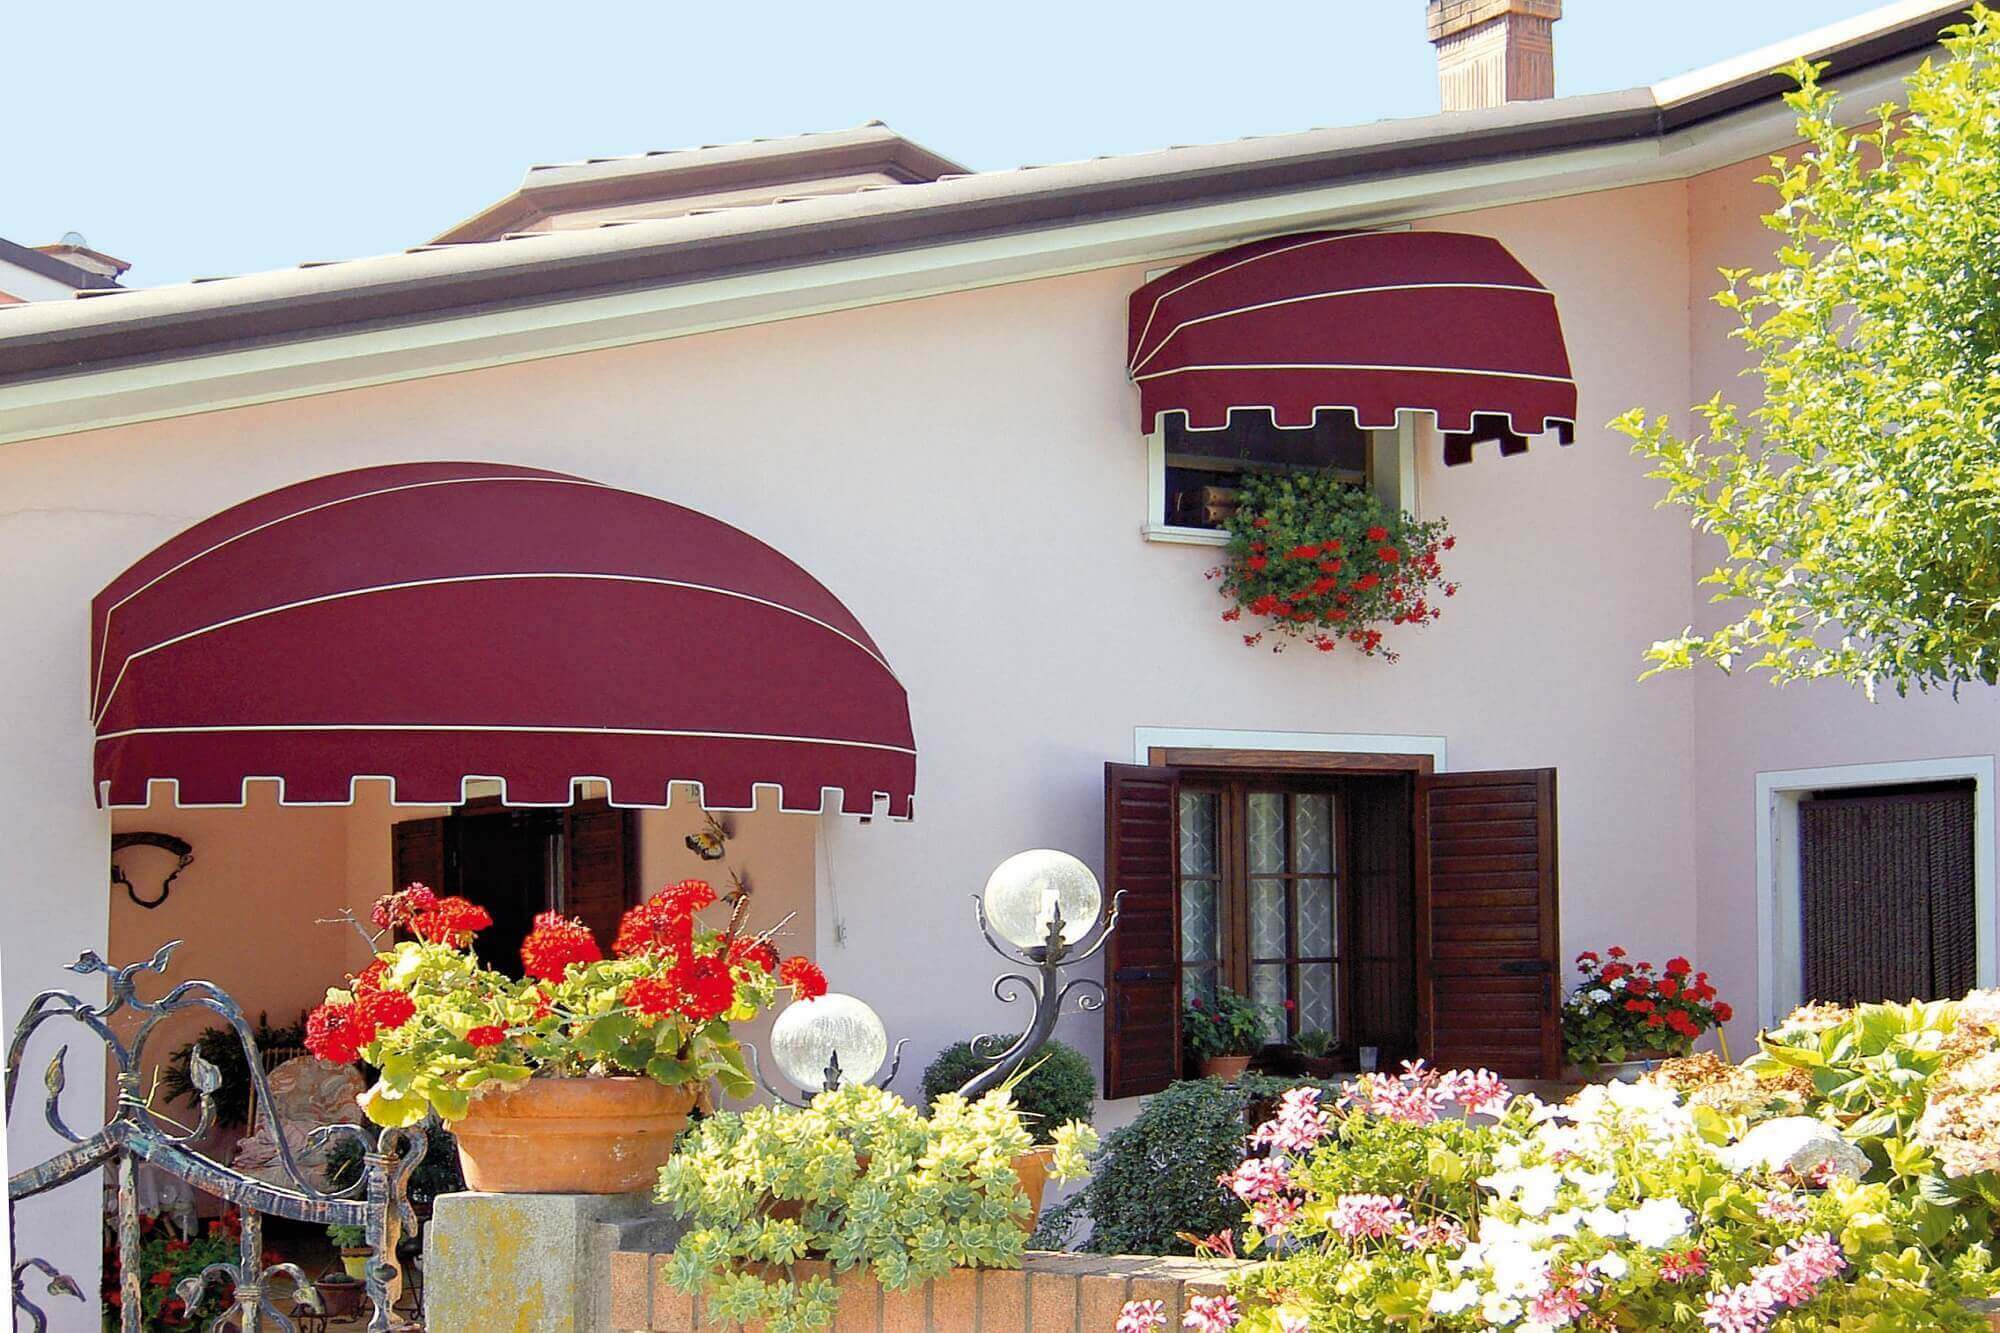 Ccanopy awnings by retractable awnings